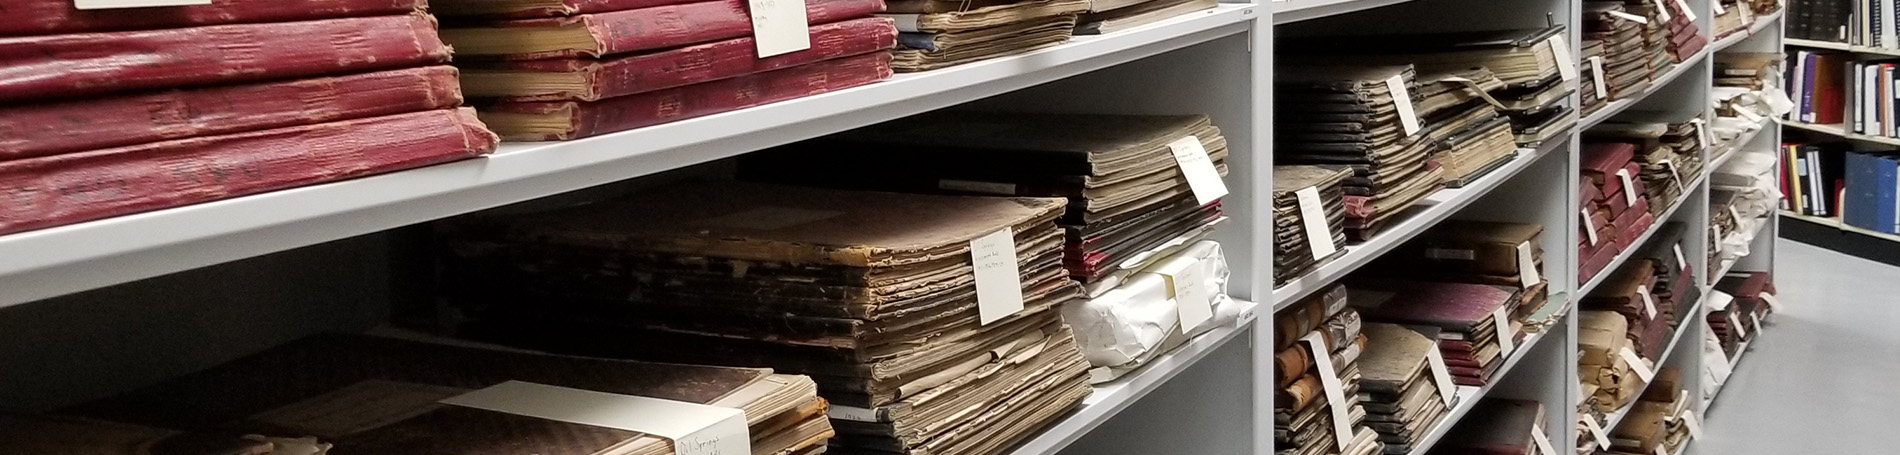 Artifacts in the Archives' vault.